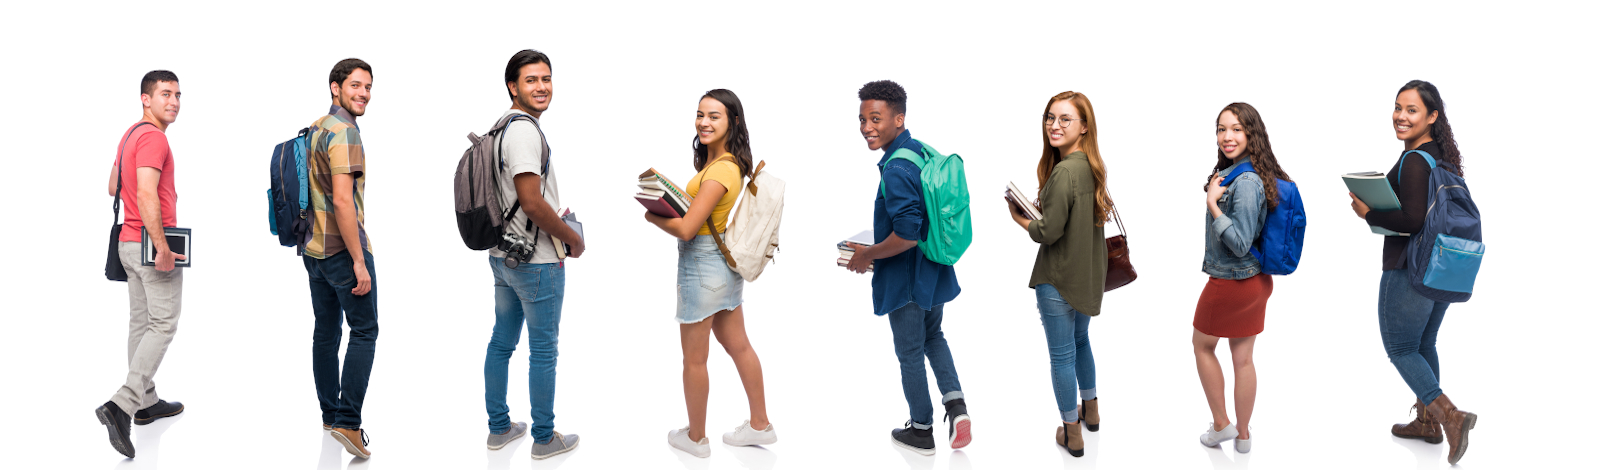 Group of post secondary students with backpacks